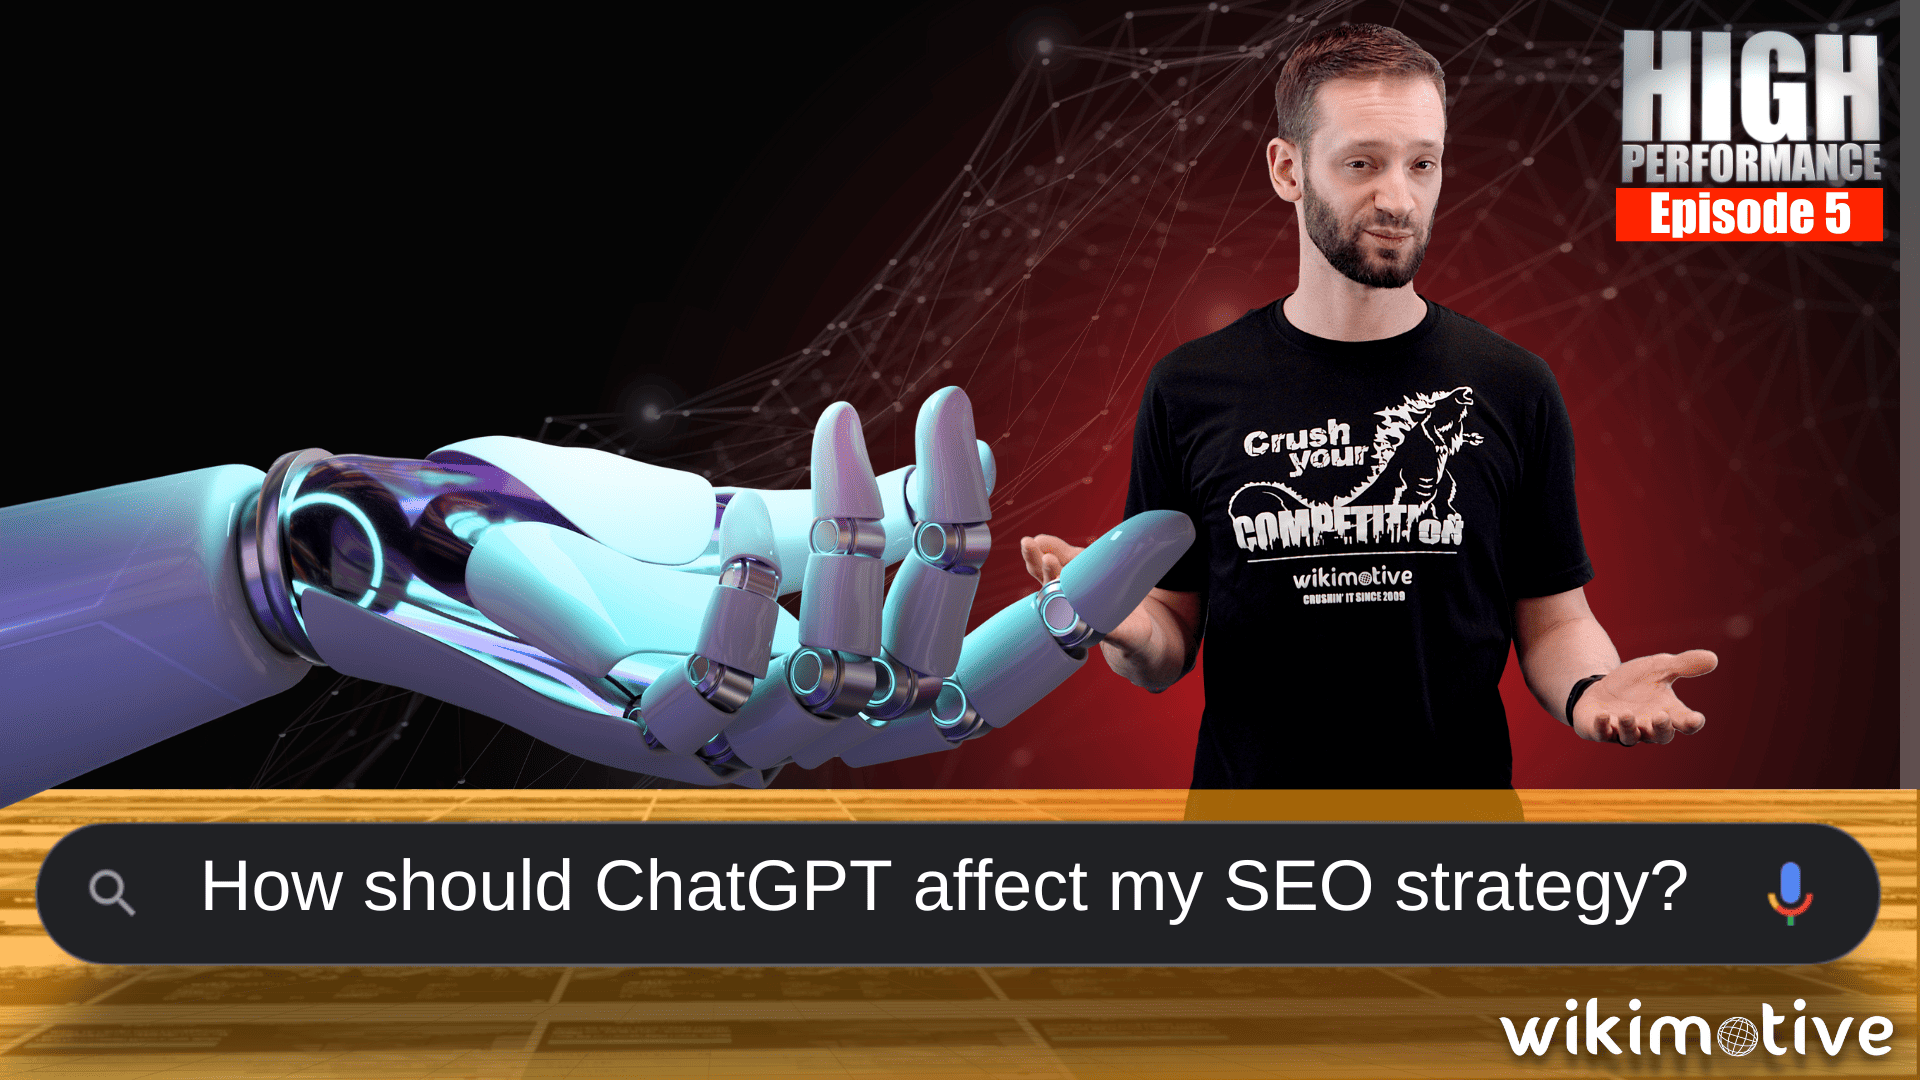 How should ChatGPT affect my SEO strategy?